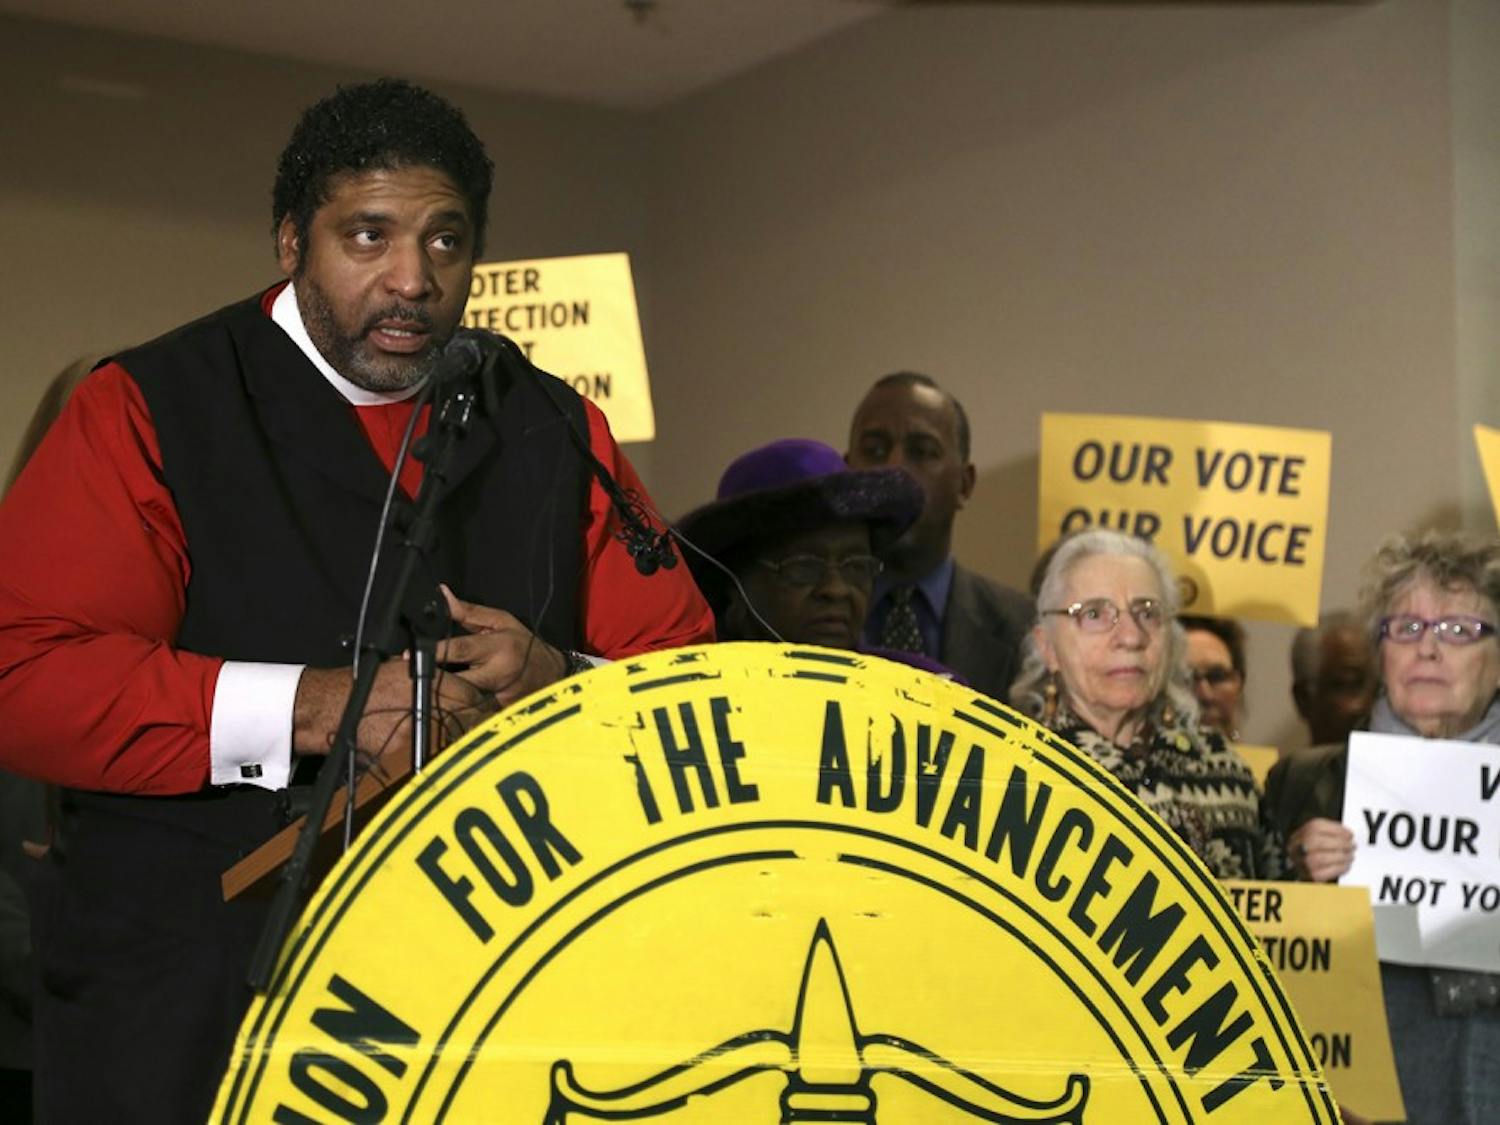 NAACP board member Rev. Dr. William Barber addresses the press at the conference in Martin Street Baptist Church in Raleigh on Tuesday. NC NAACP and Democracy NC joined with faith leaders to discuss a mass voter engagement campaign.